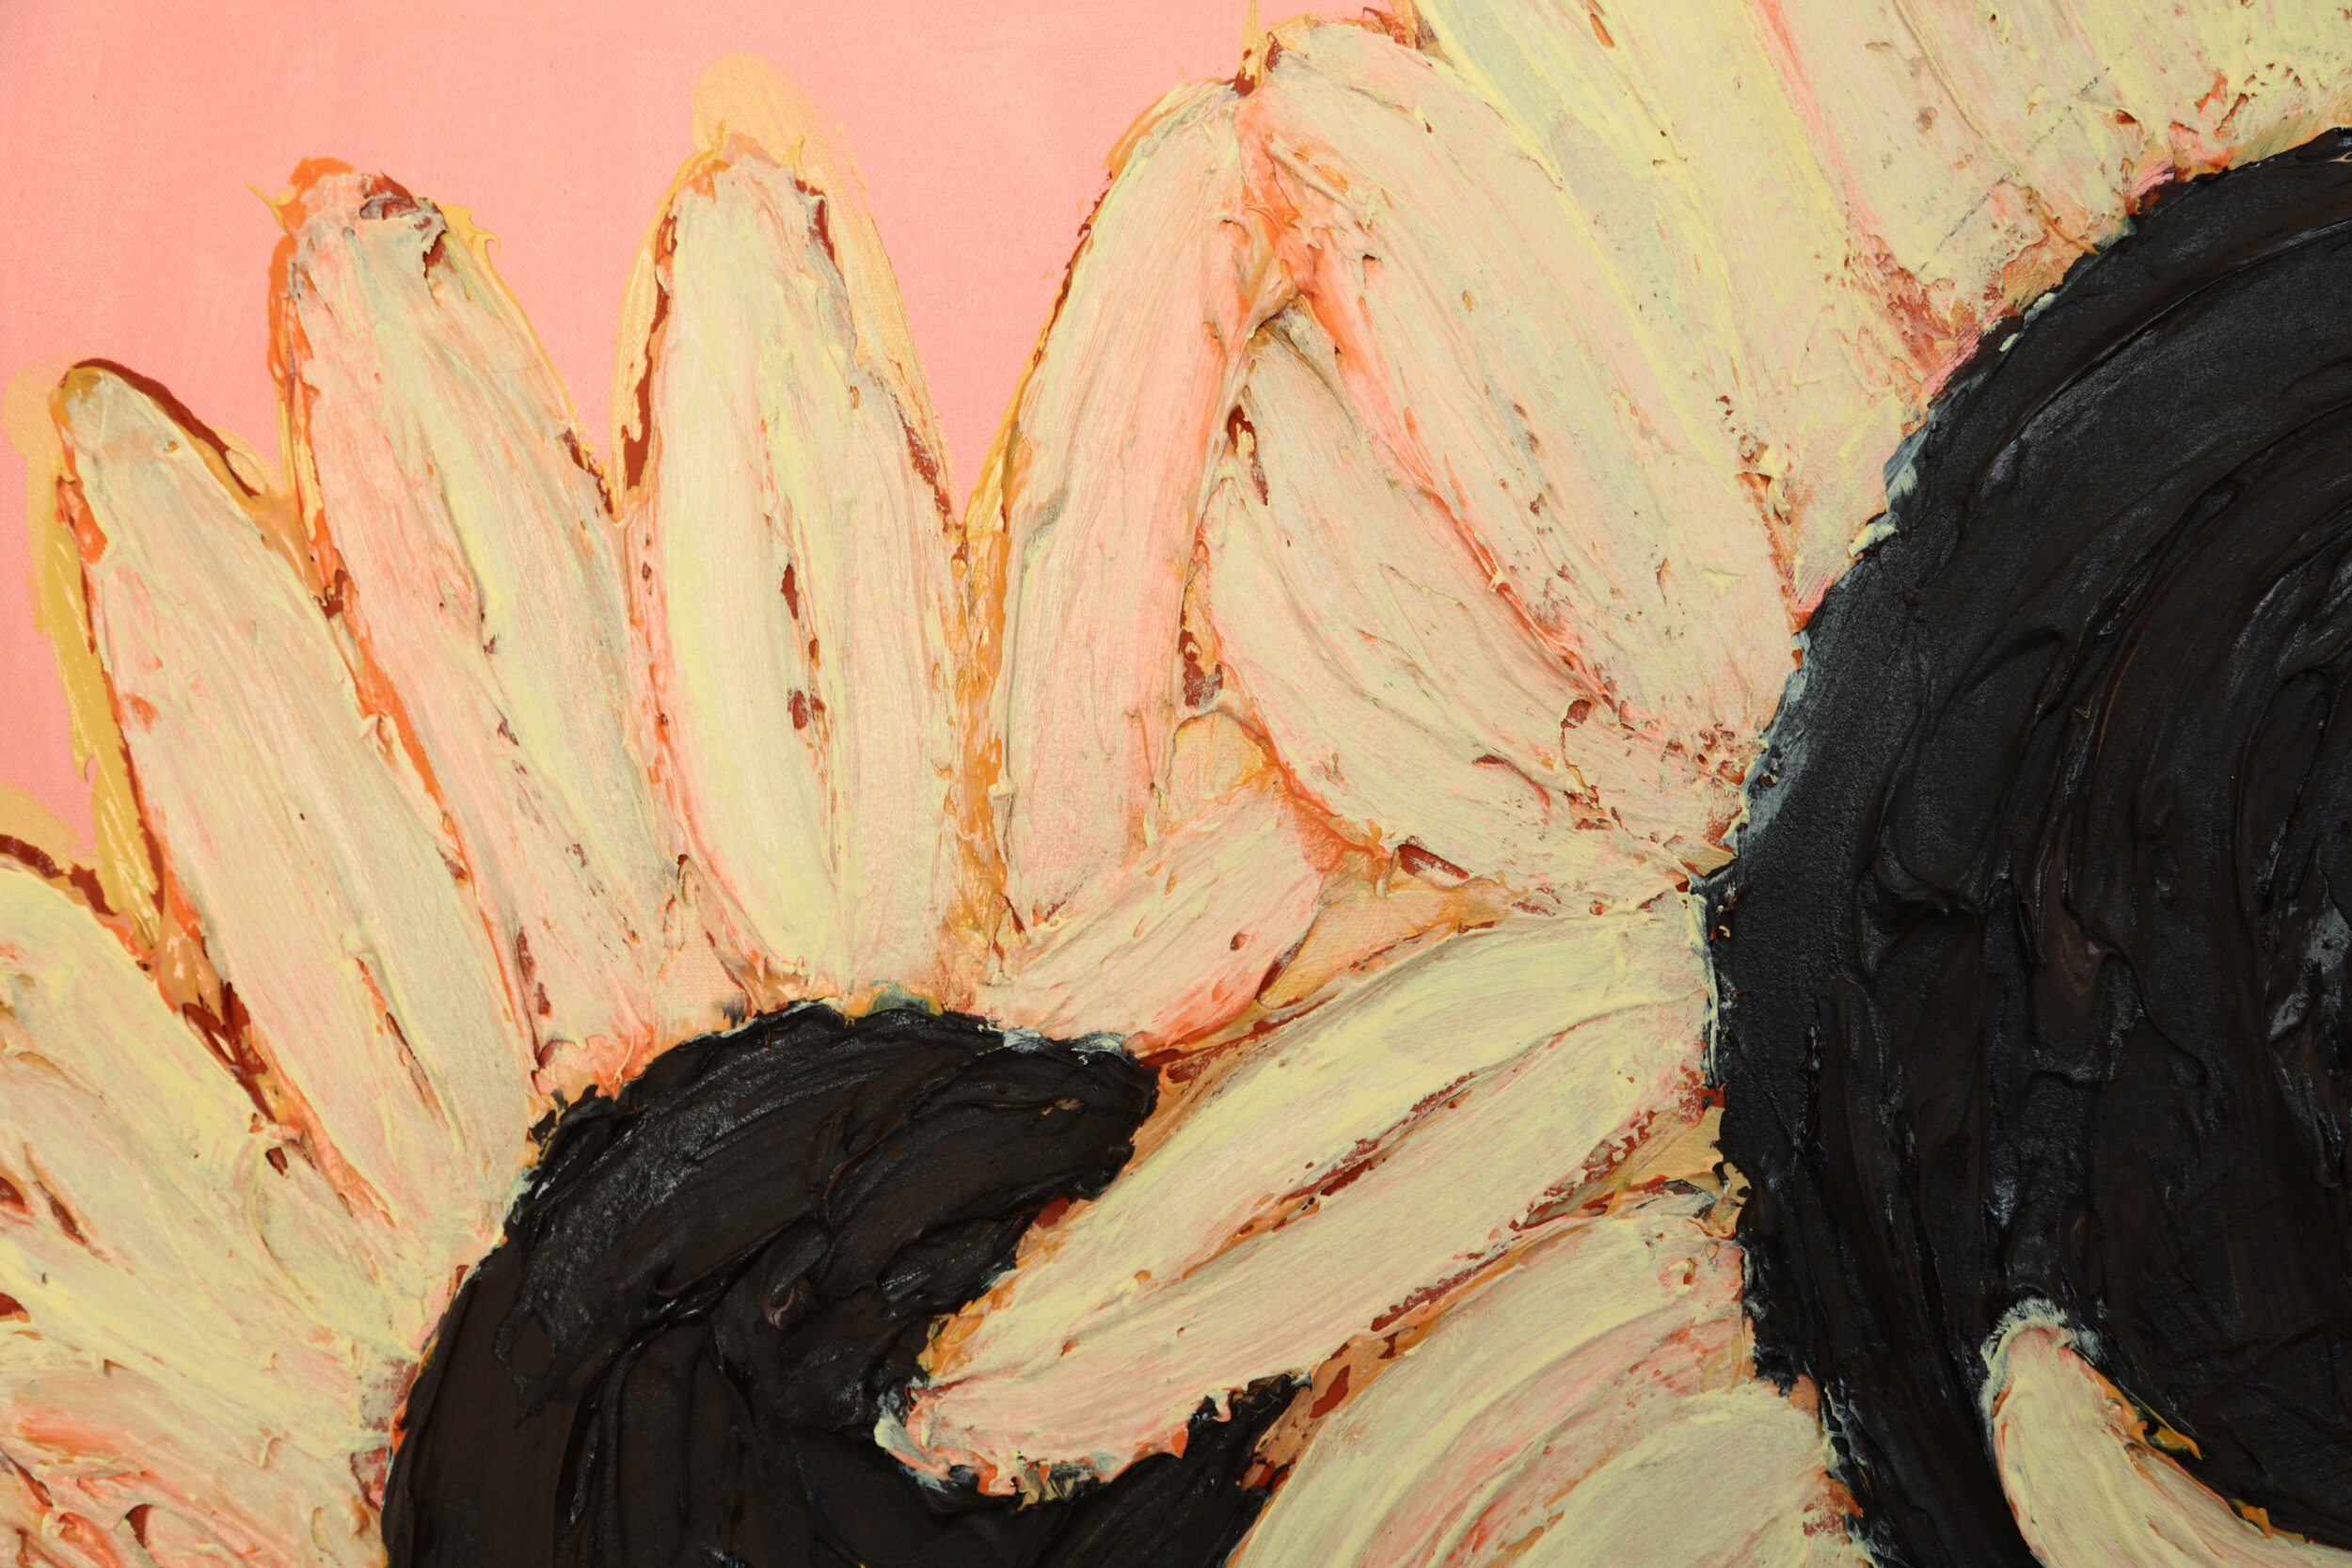  Detail view of:   Alex Nguyen-Vo   Three Sunflowers, May-June  May 2020 Acrylic on canvas  24 x 30 inches 